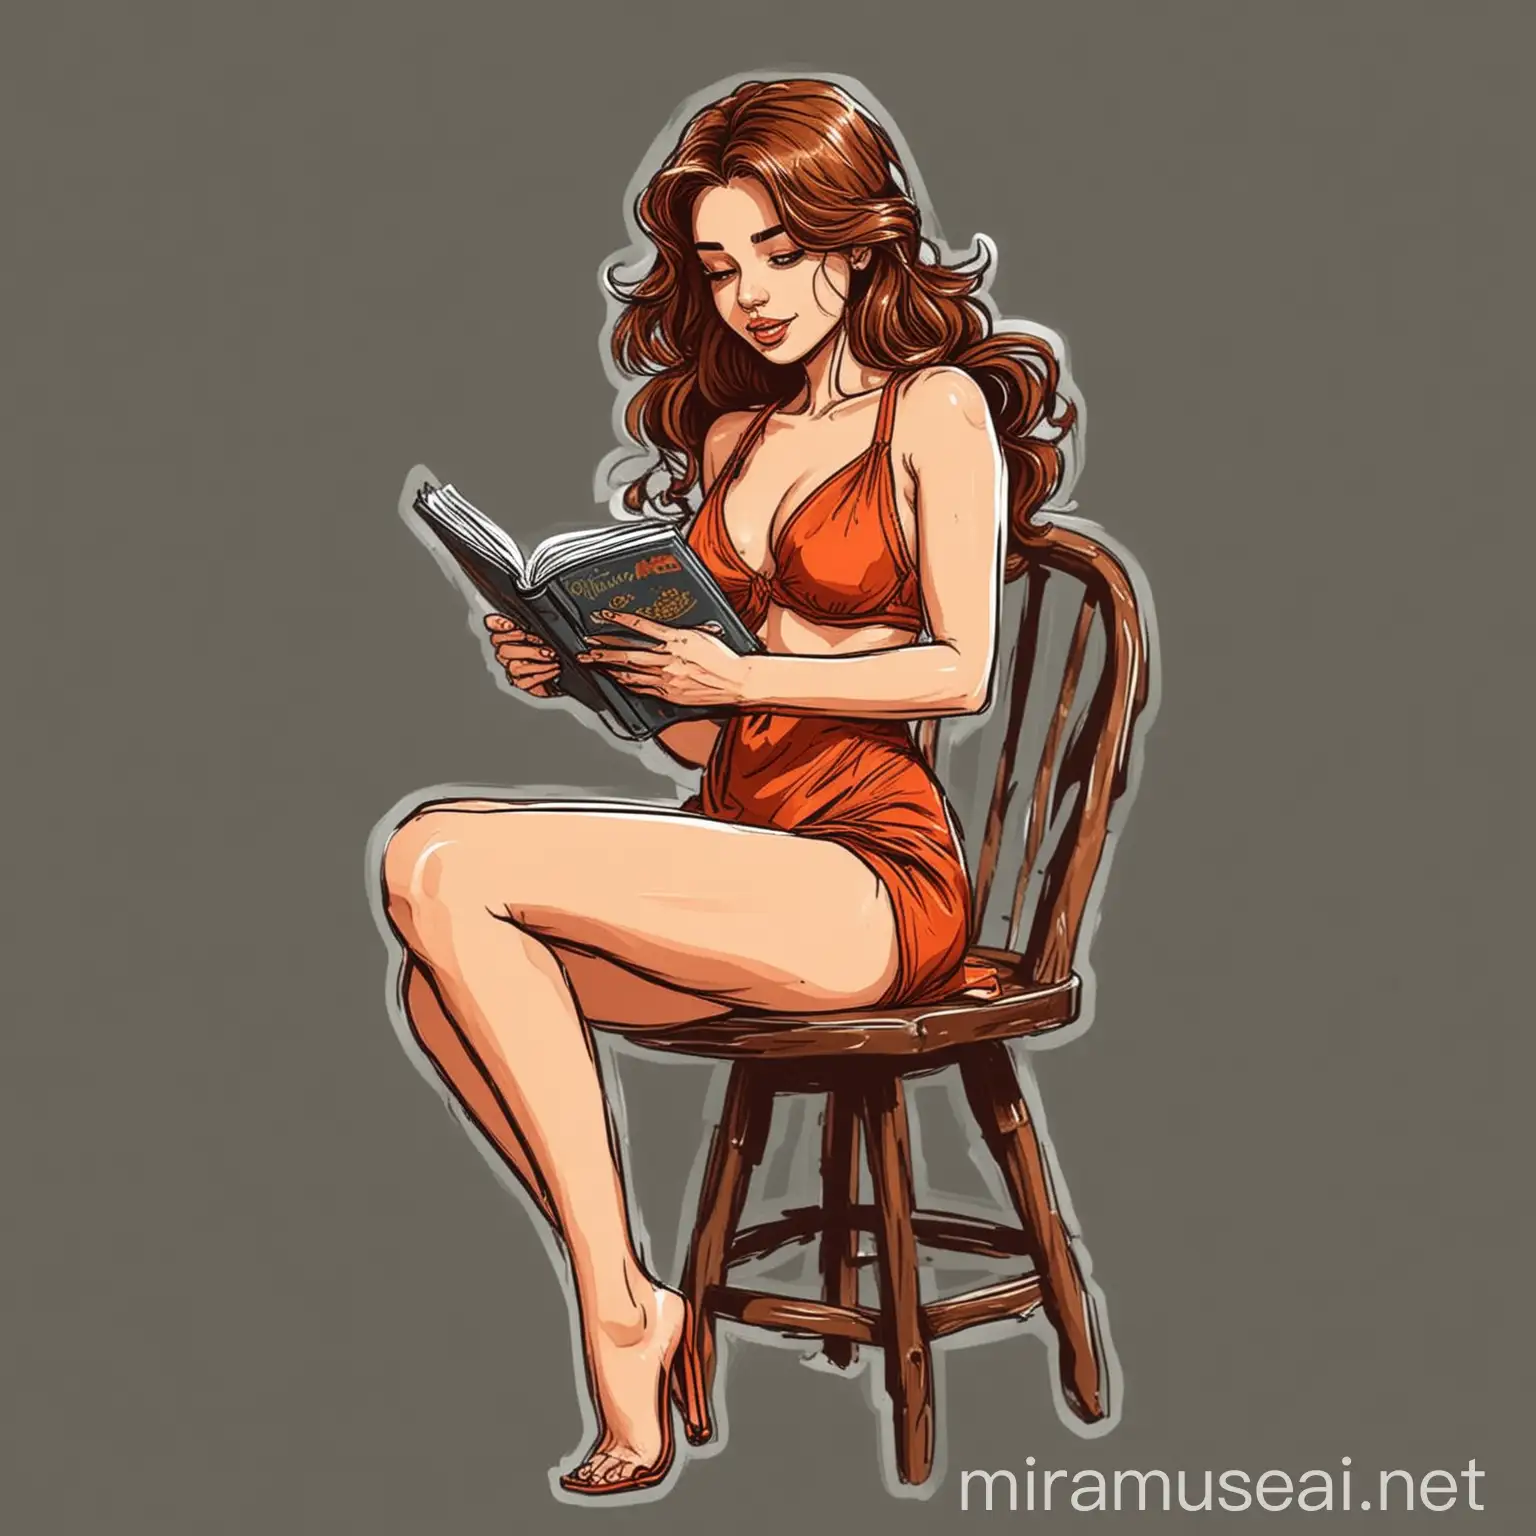 A higher quality vector illustration sticker of hot sexy 25 years old girl sitting on stool reading book, dress bikini , brown hair style,  black outline border